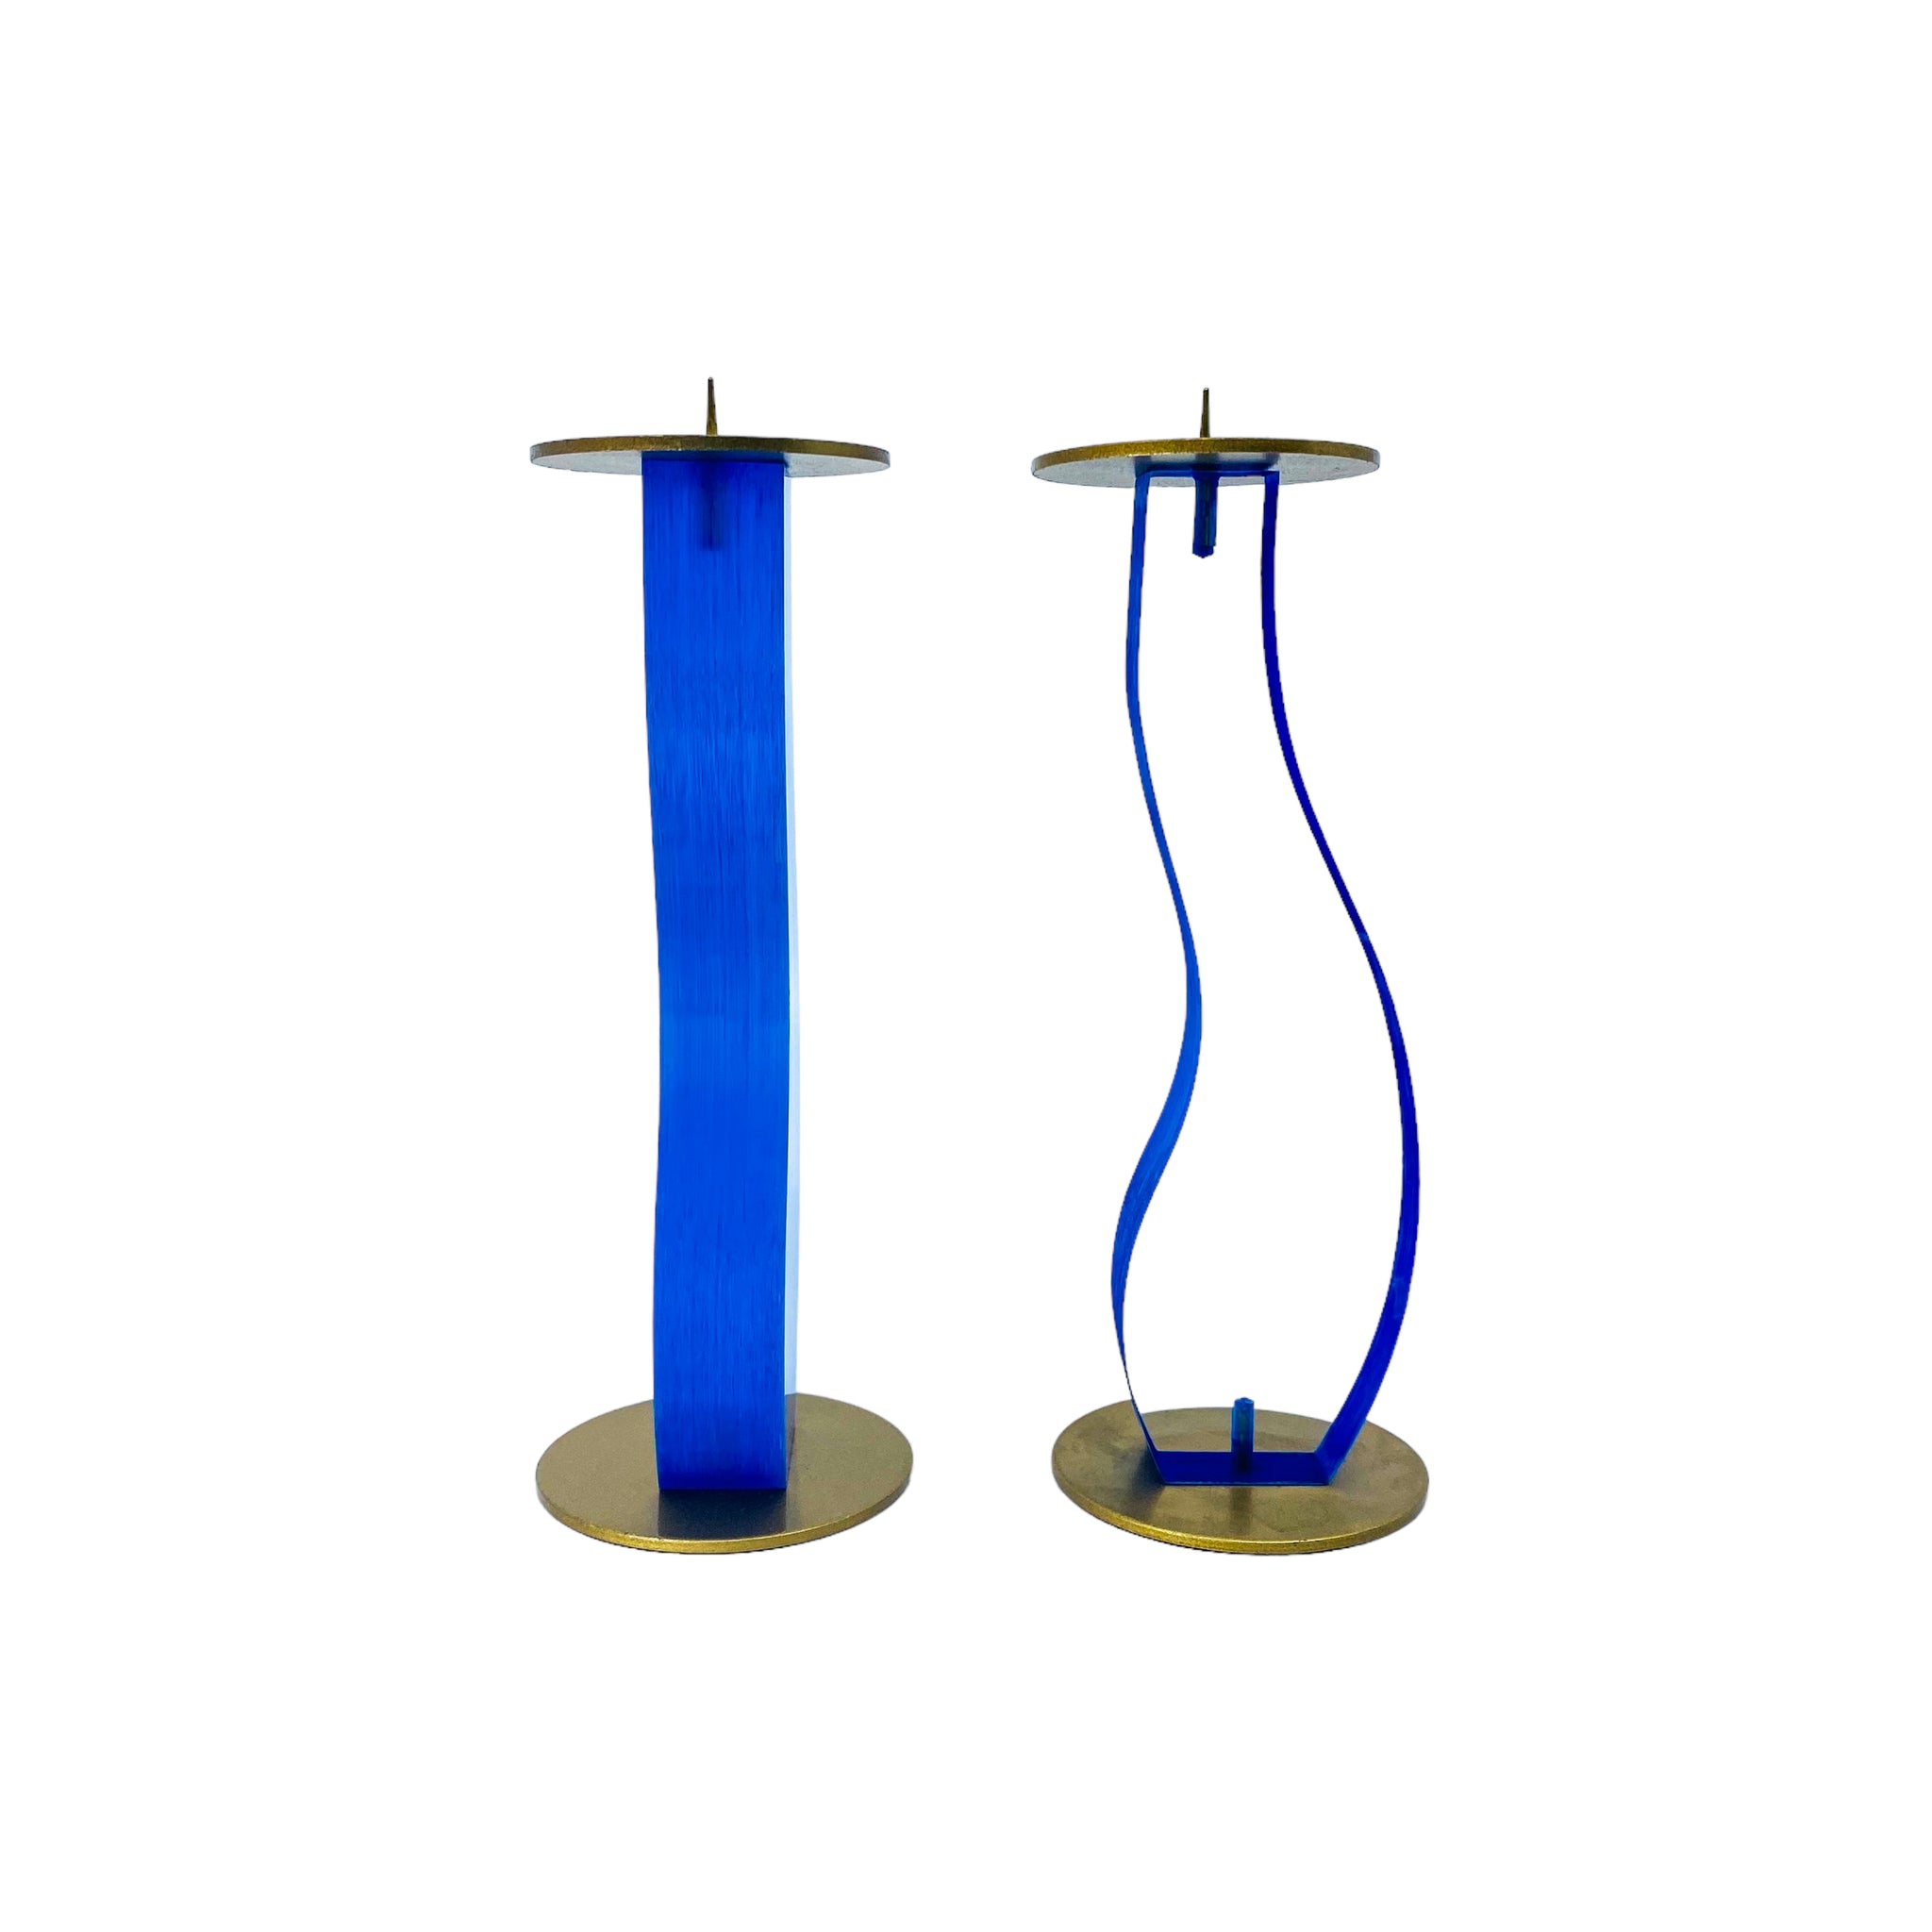 Sculptural Lucite Resin Candle Holders, Pair